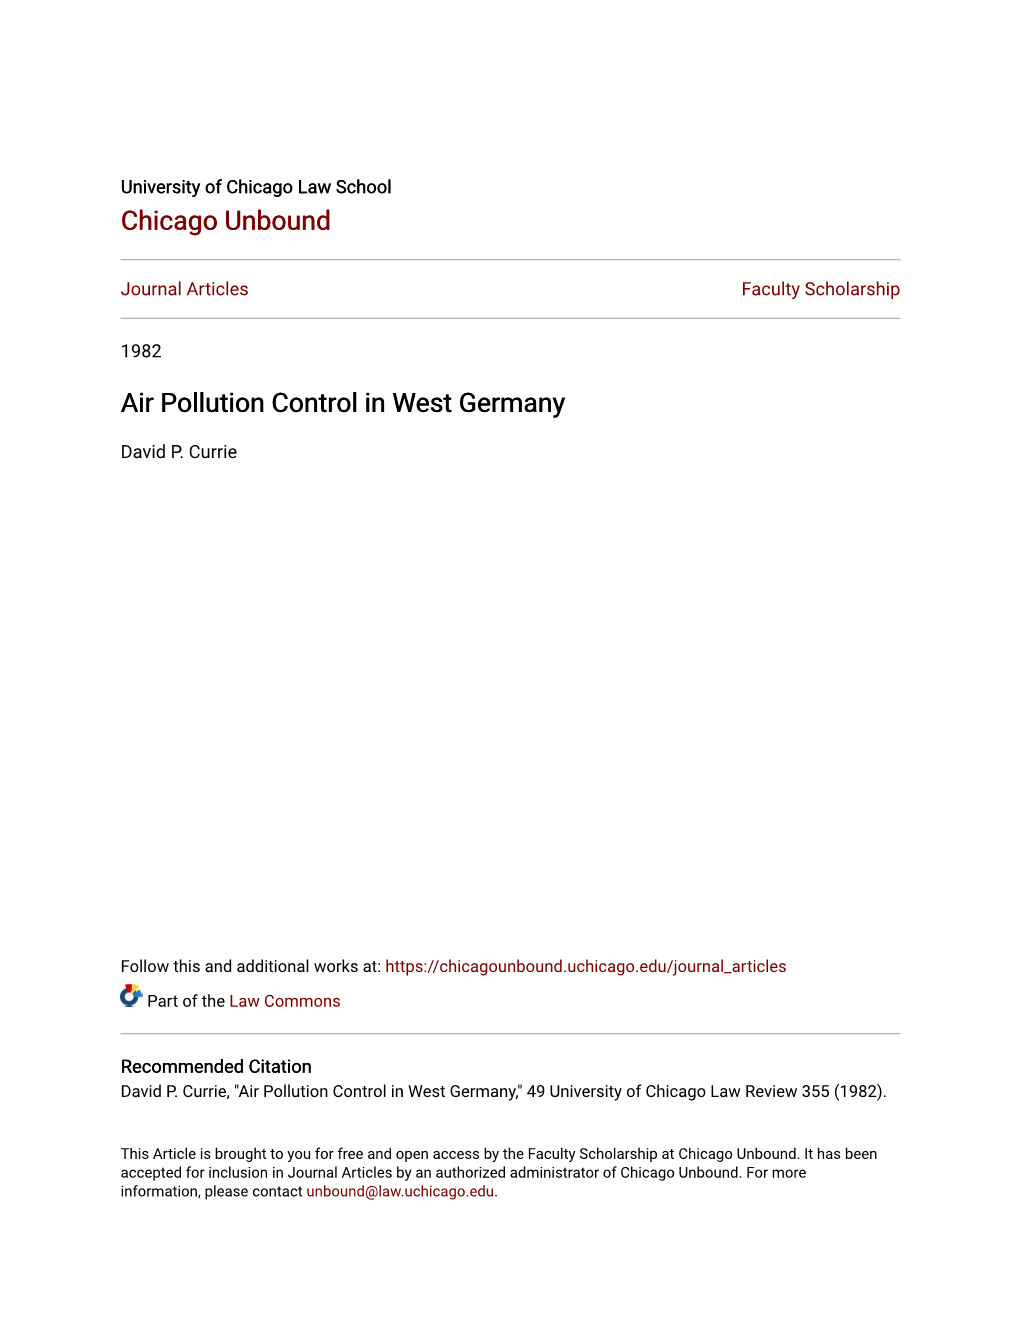 Air Pollution Control in West Germany